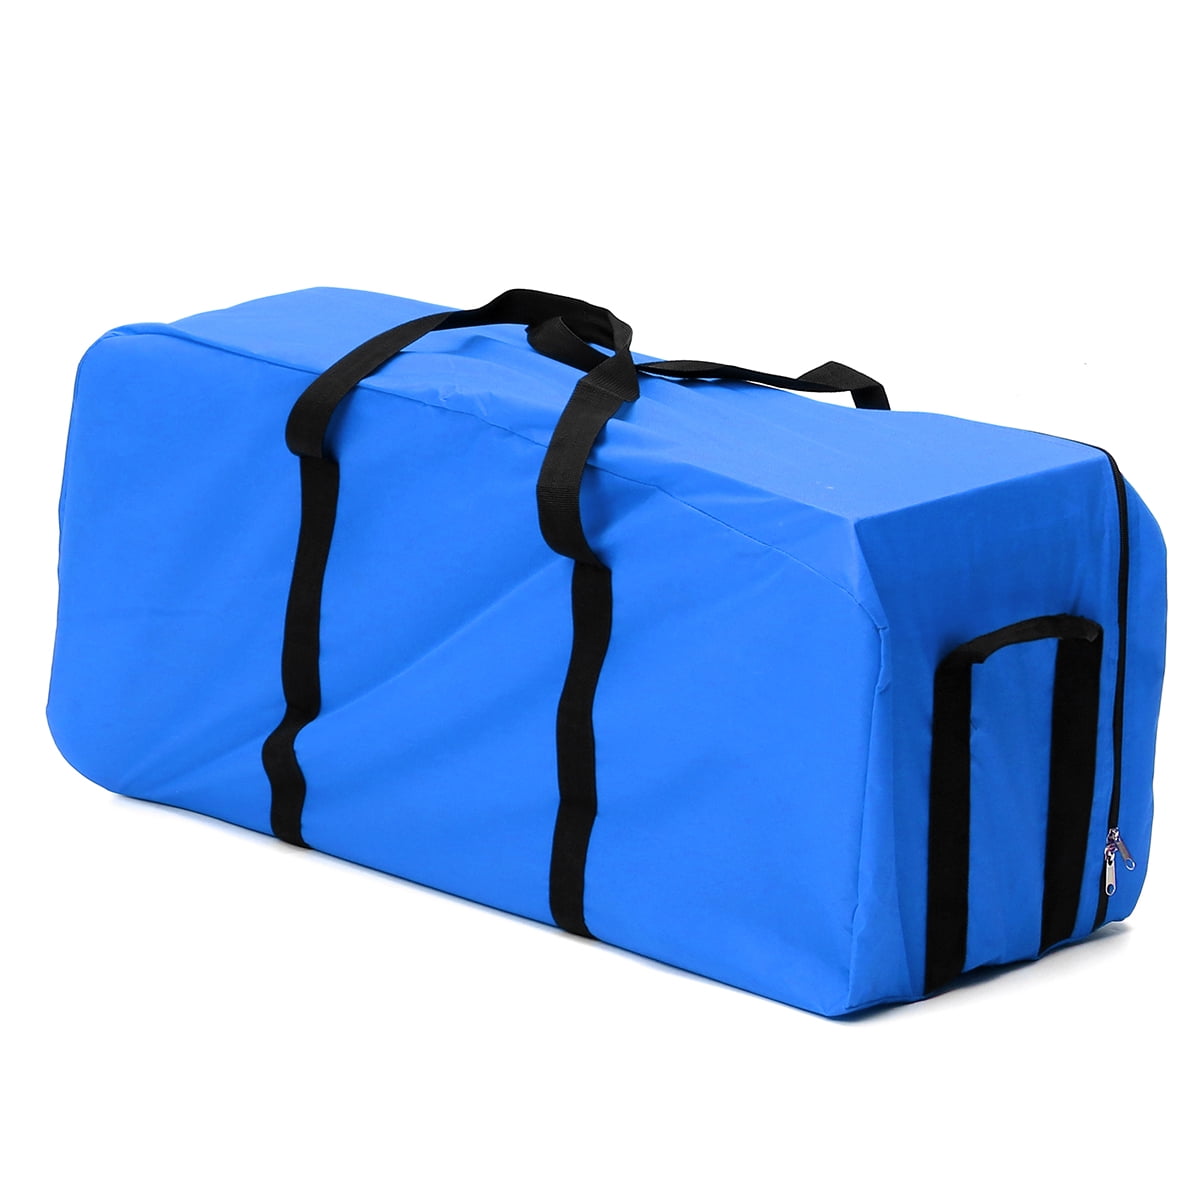 Packable Travel Duffle Bag Foldable Duffel Bags Large Oxford Bag for ...